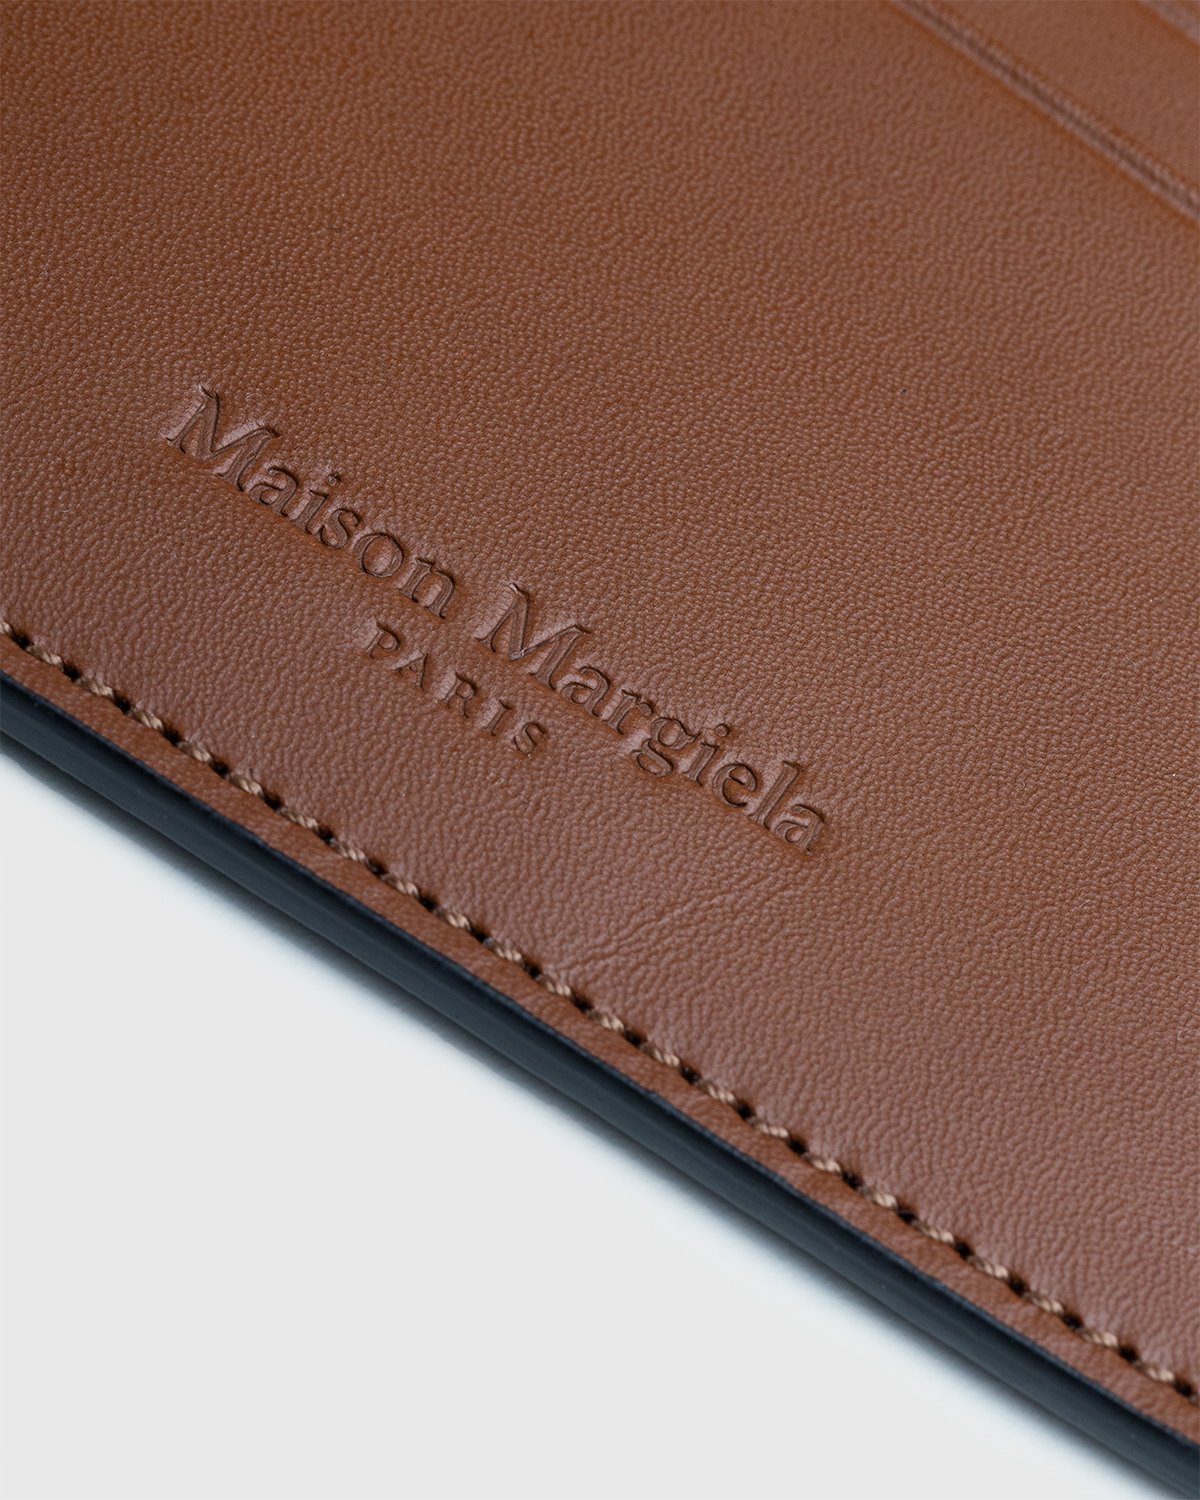 Maison Margiela - Leather Card Holder Brown - Accessories - Brown - Image 5